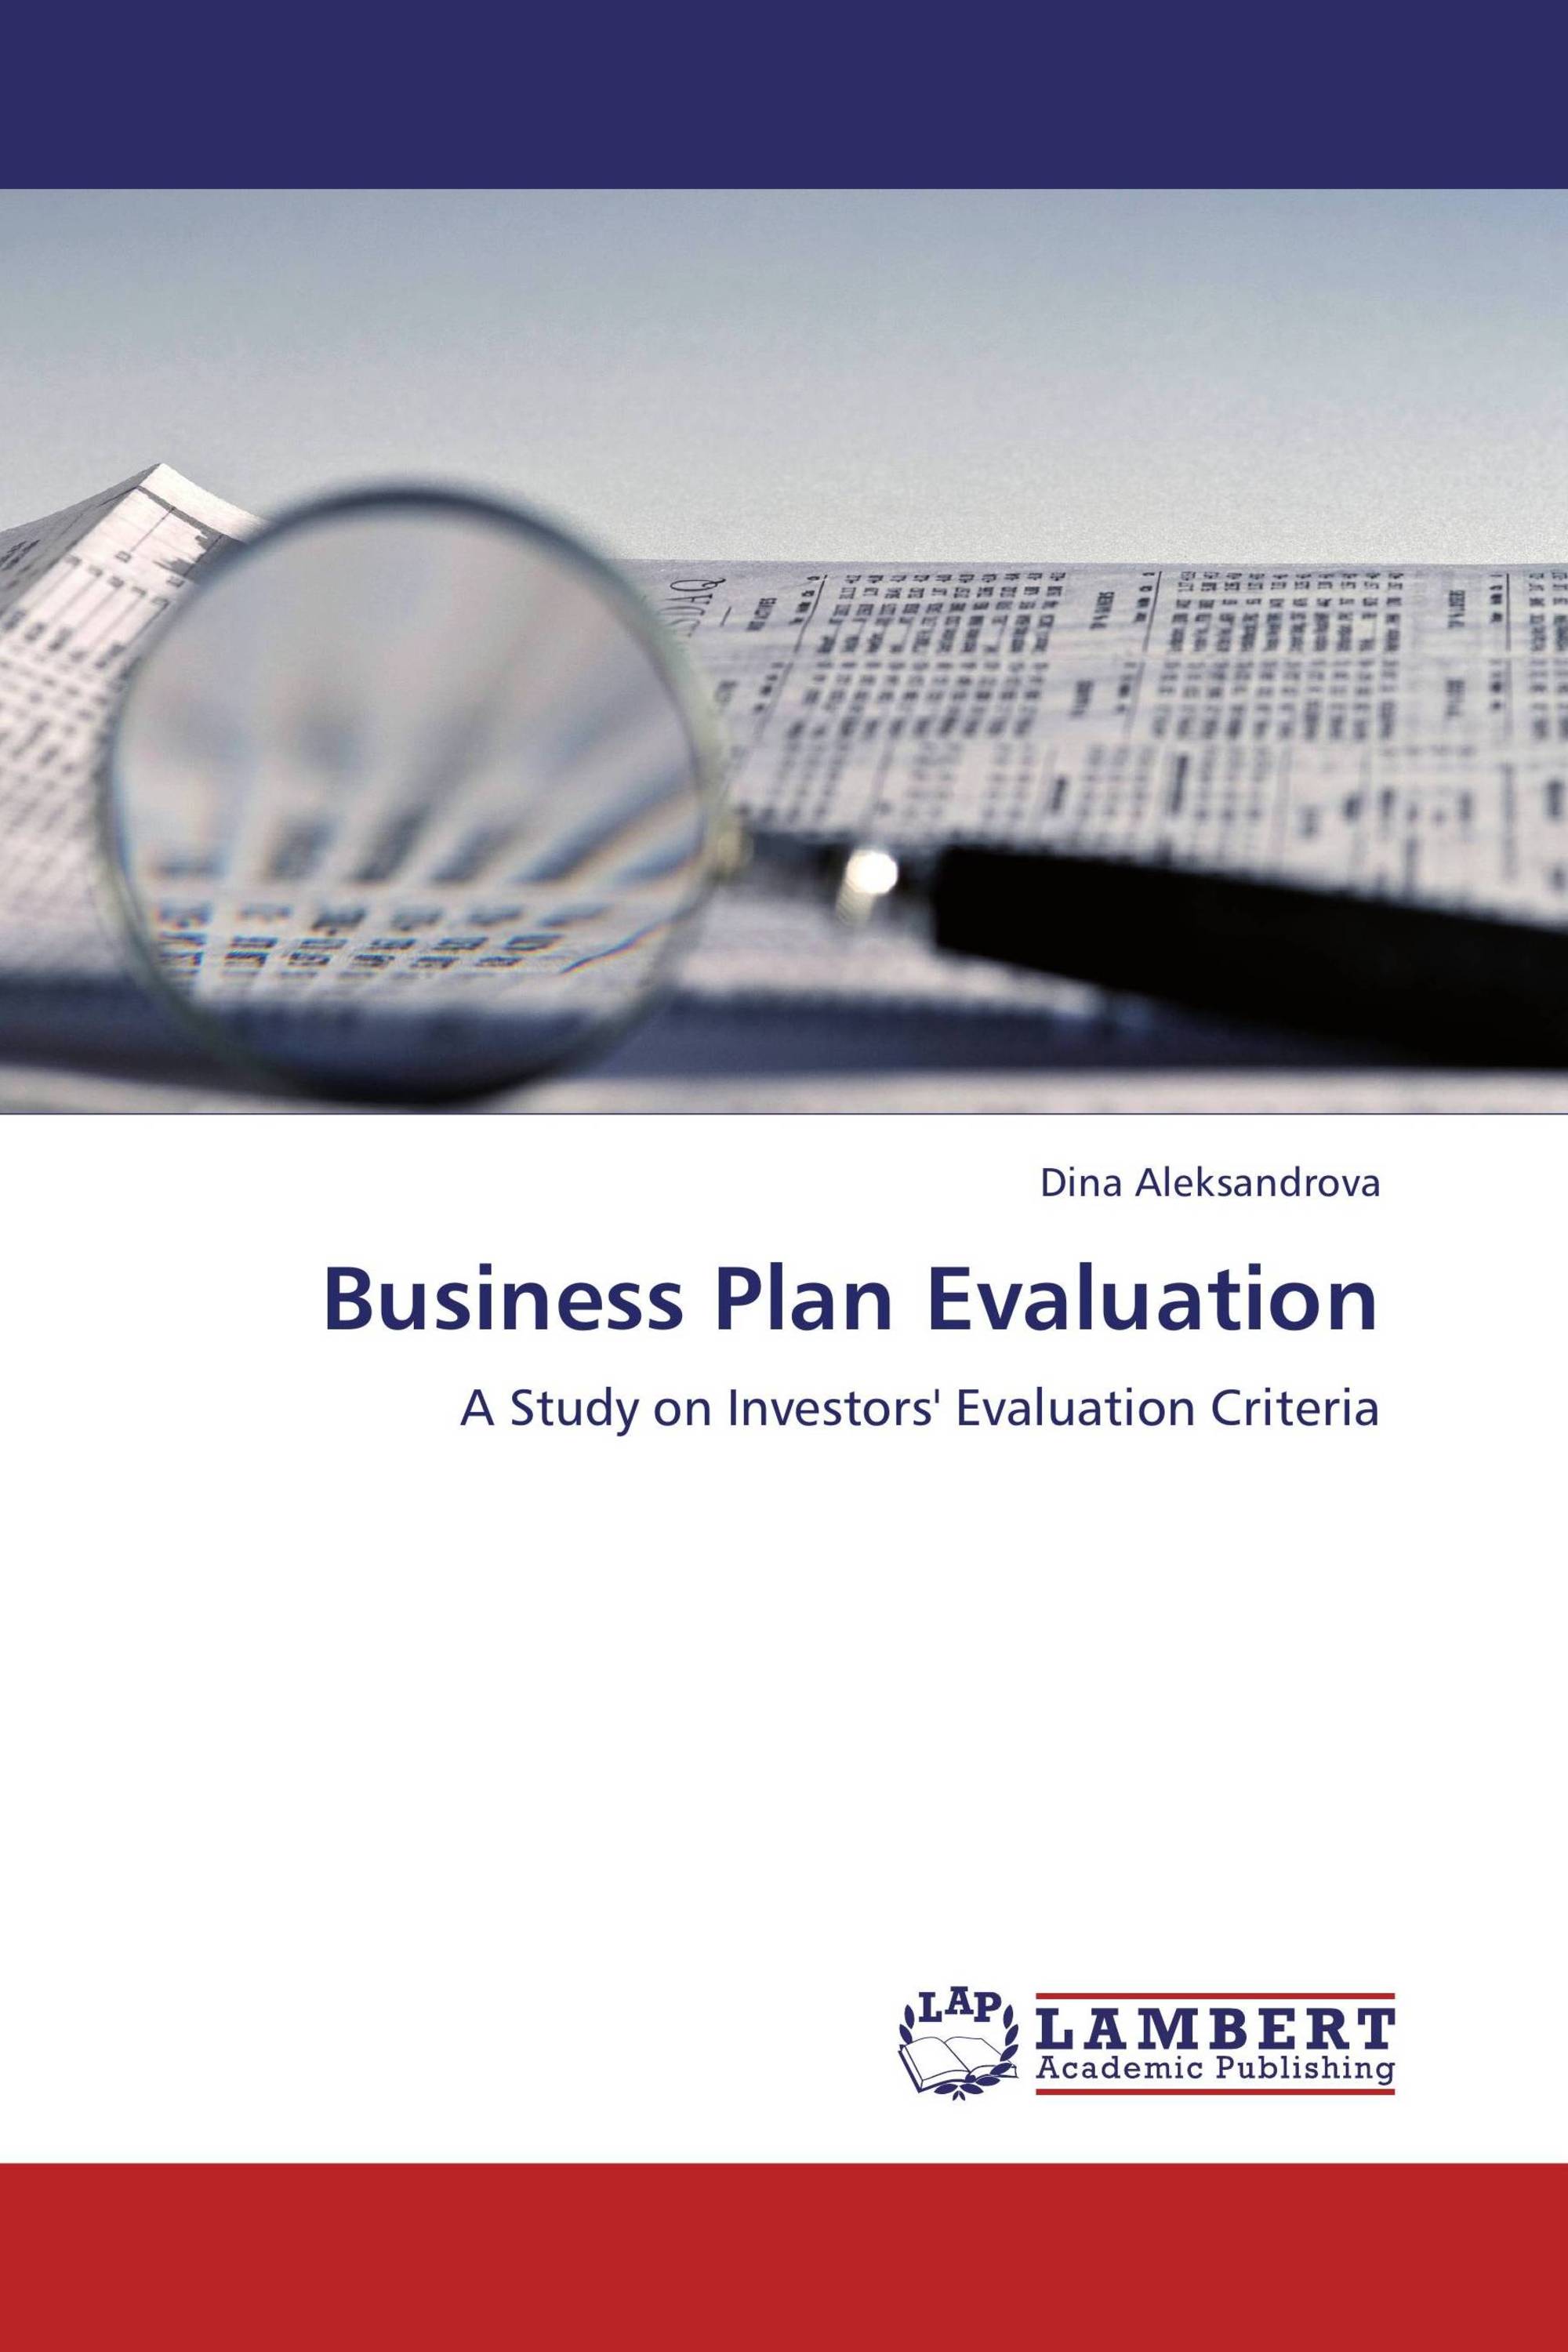 business plan evaluation report